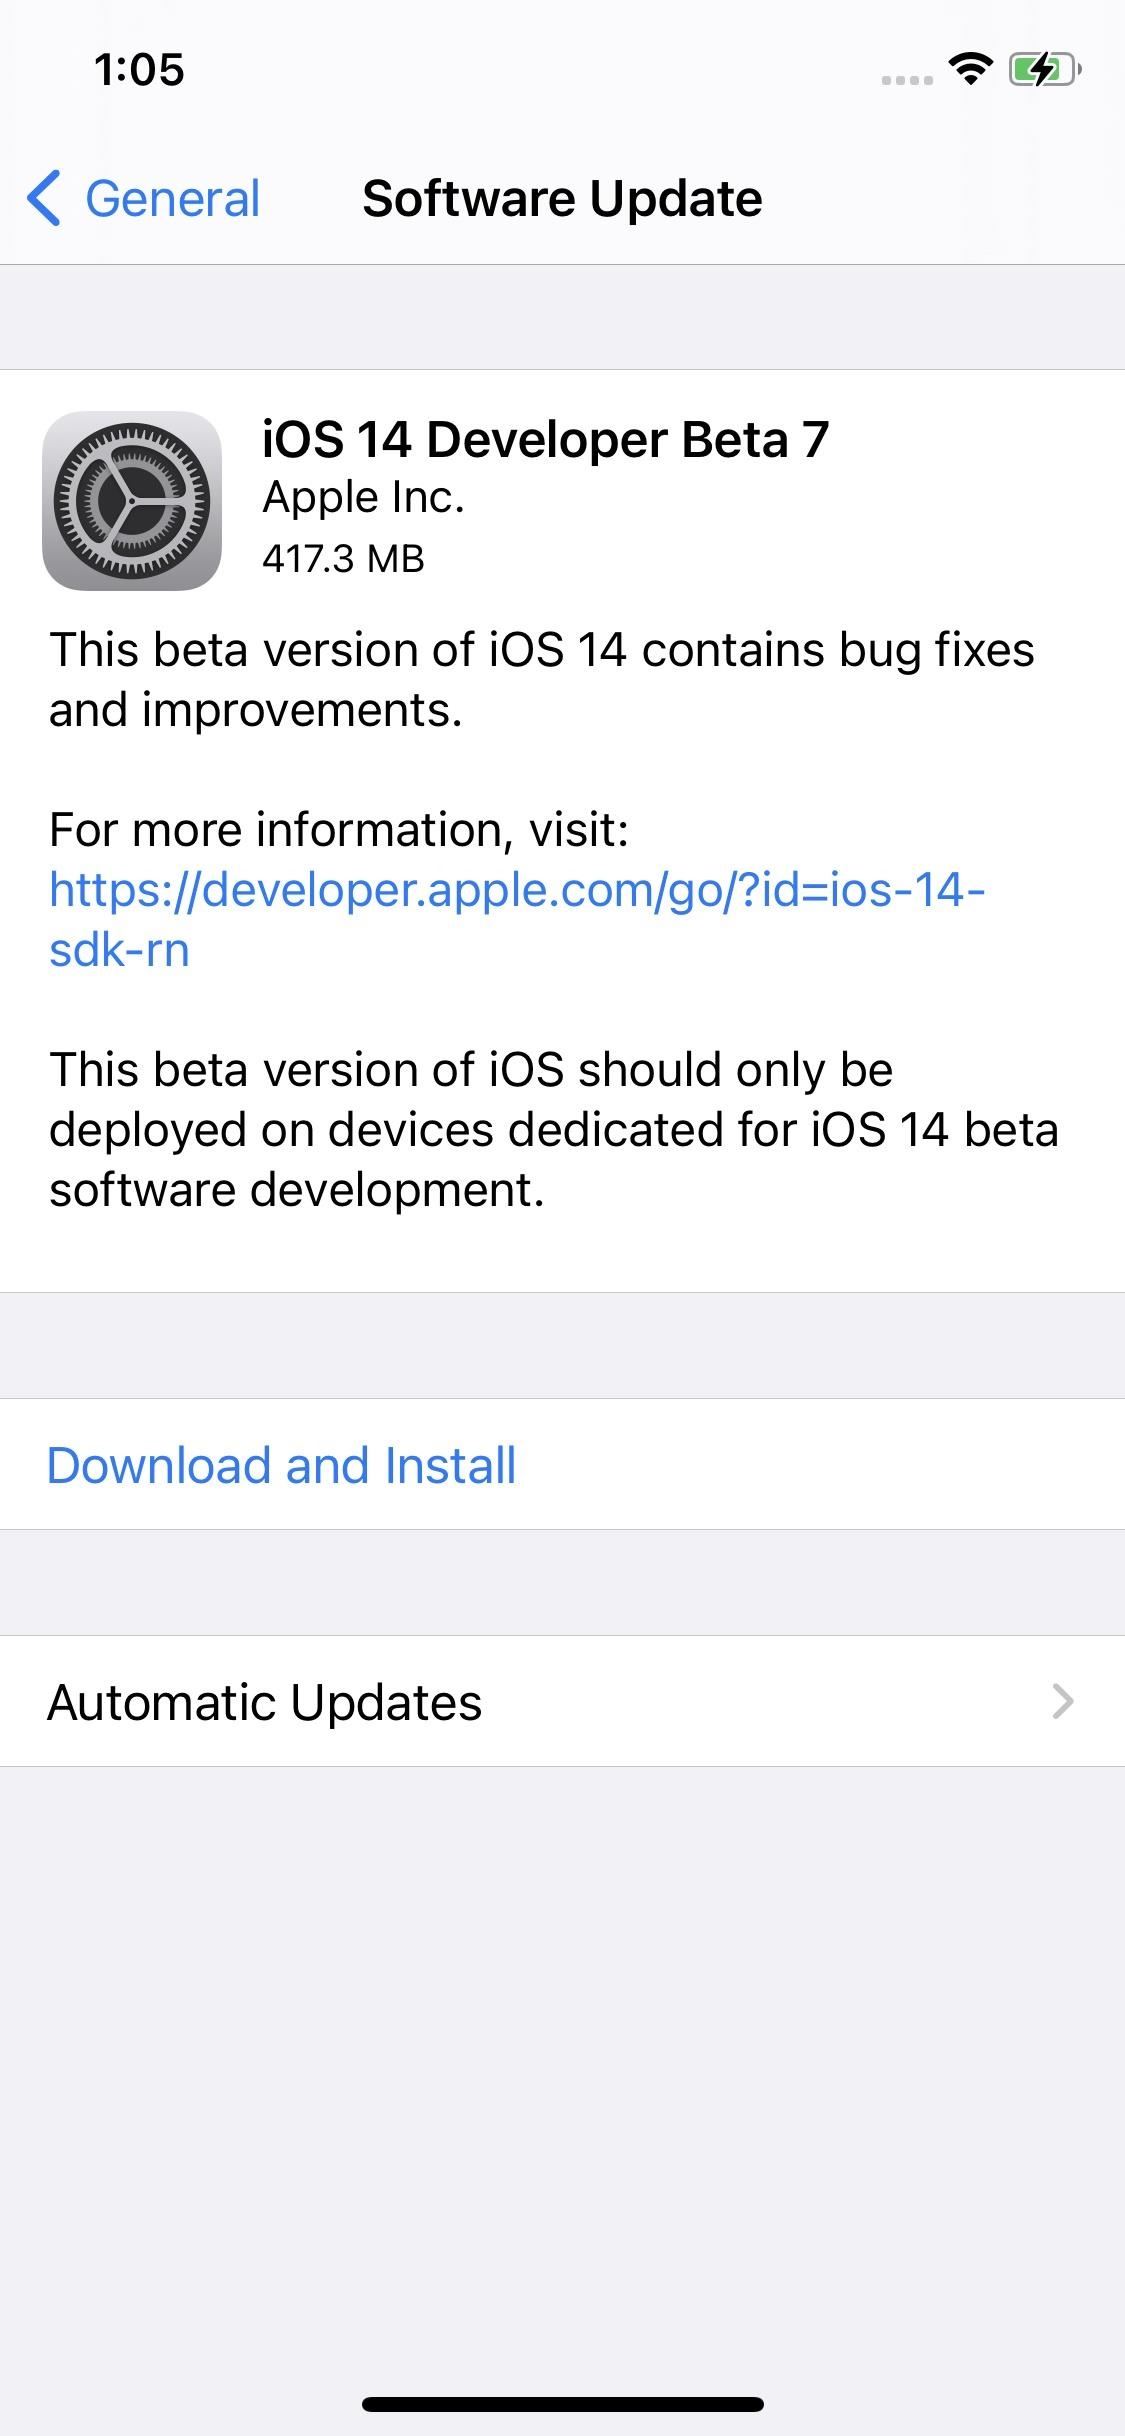 Apple's iOS 14 Developer Beta 7 for iPhone Includes New Wallpaper Options